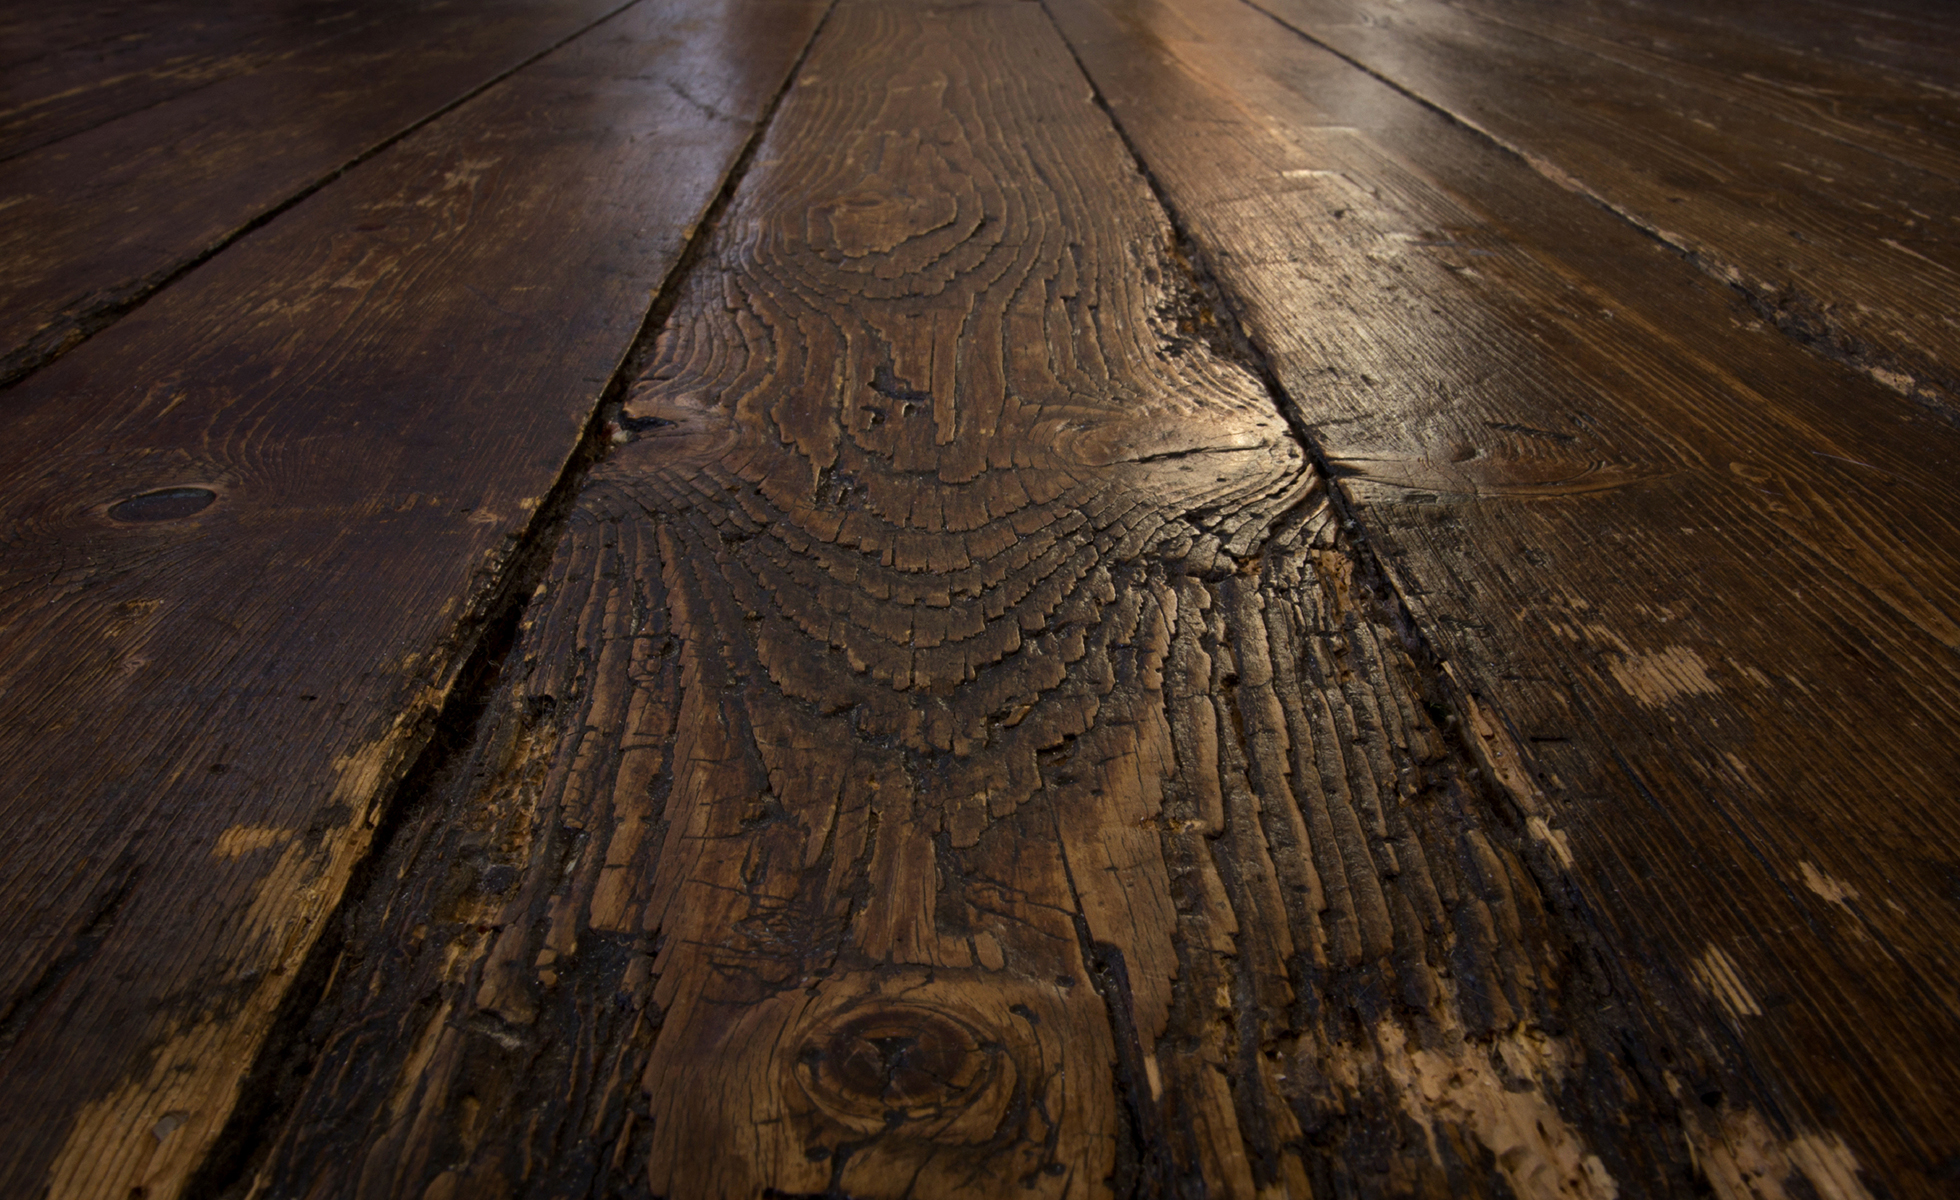 Repairing And Caring For Old Timber Floors Homebuilding Renovating